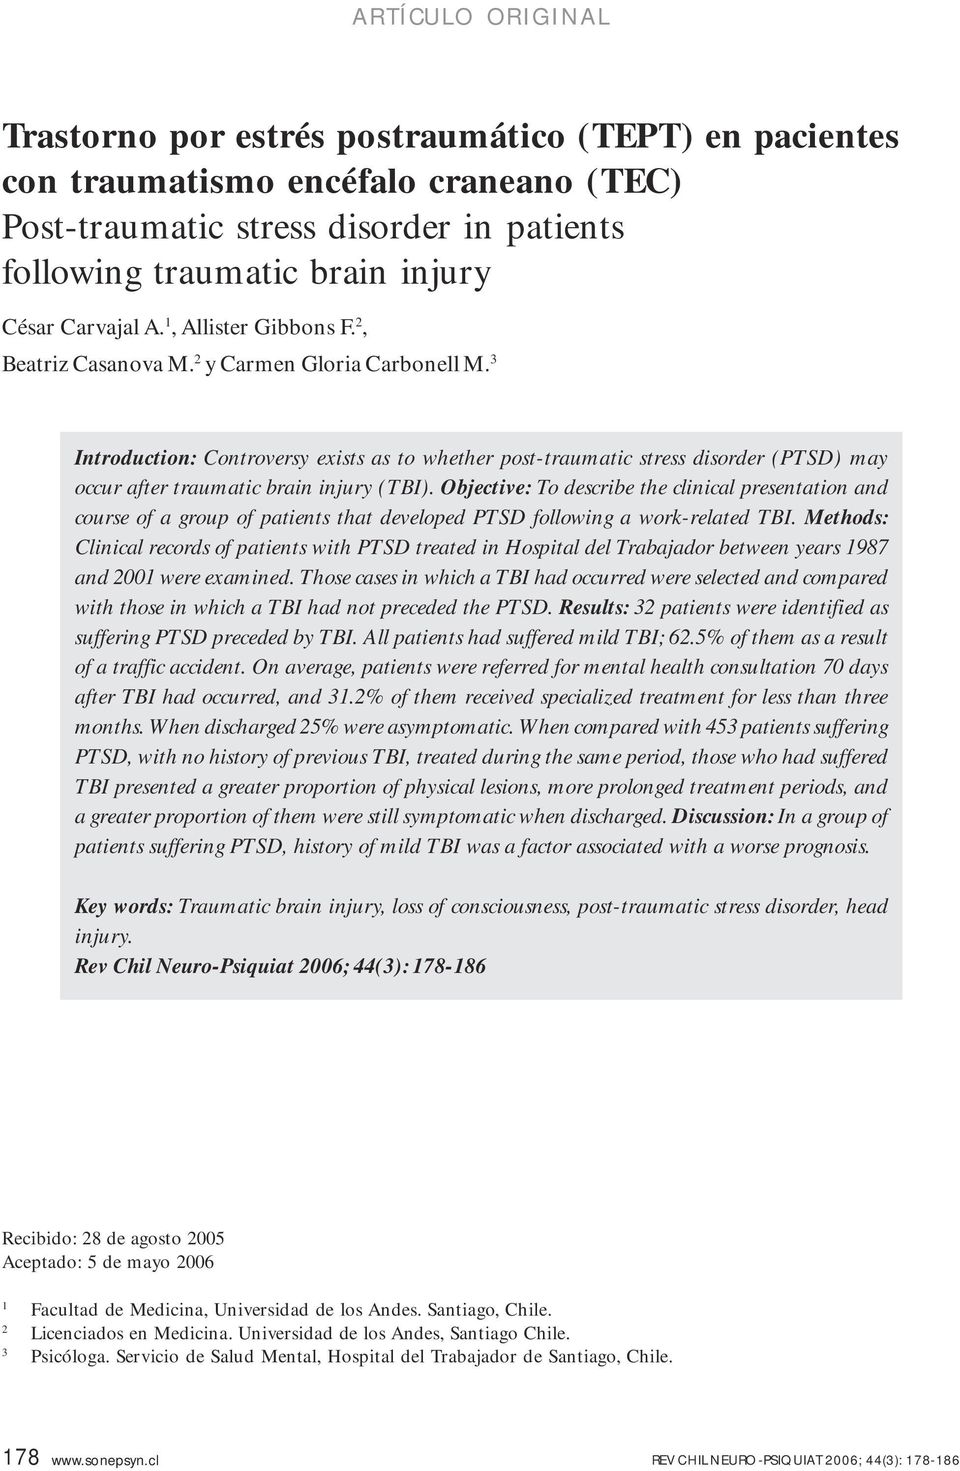 3 Introduction: Controversy exists as to whether post-traumatic stress disorder (PTSD) may occur after traumatic brain injury (TBI).